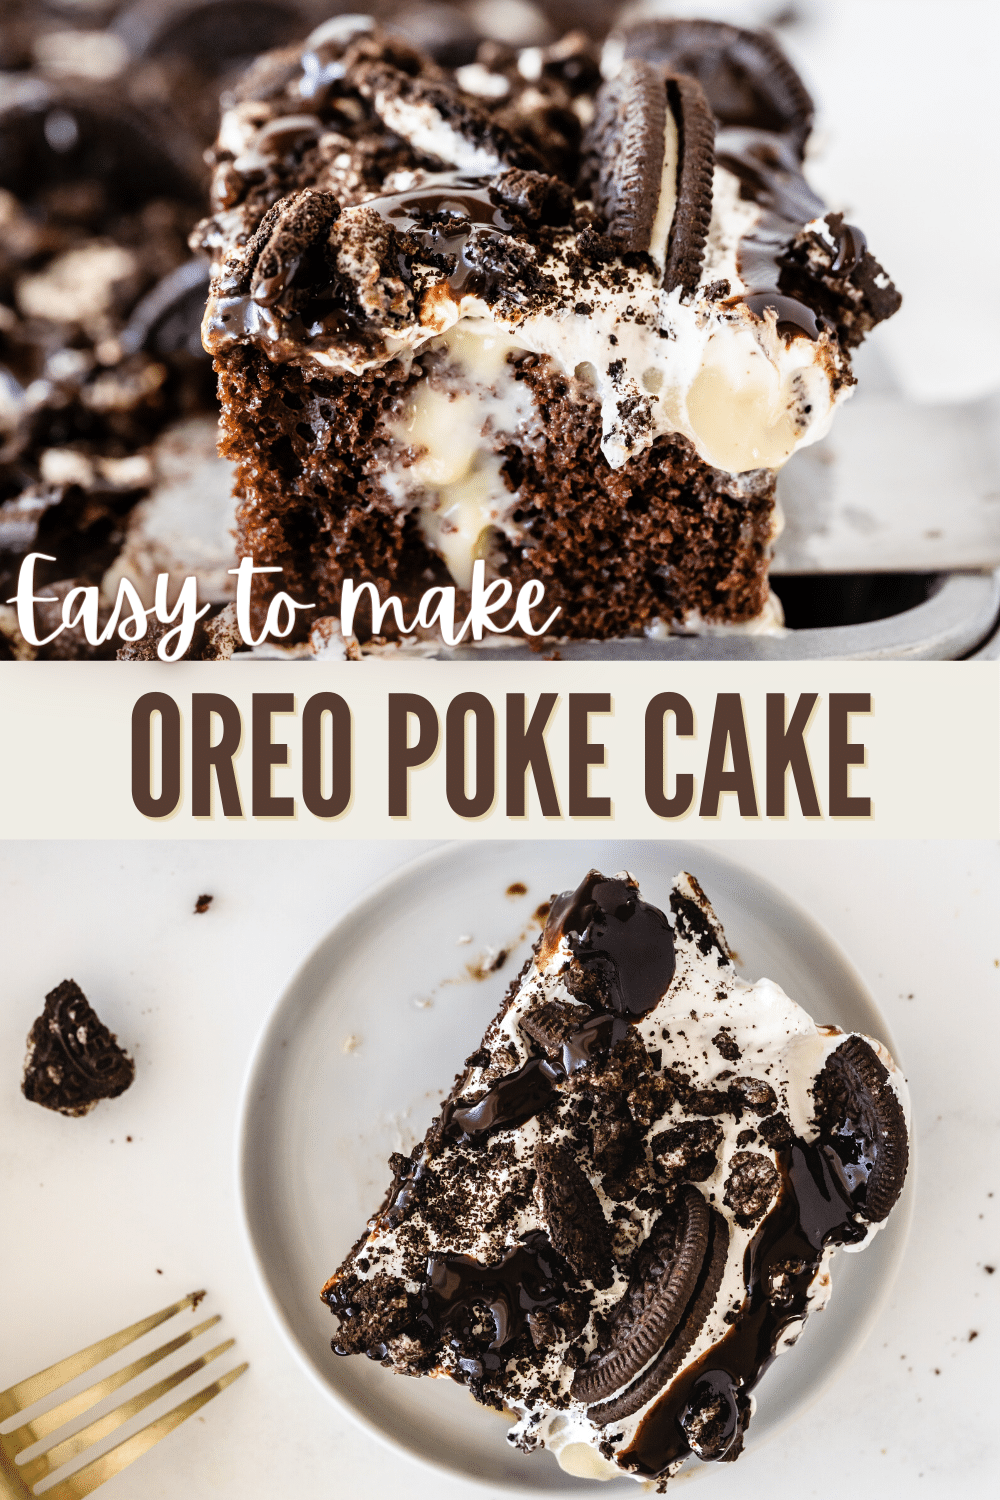 a collage of 2 images of Oreo Poke Cake, top part shows the layers of the oreo poke cake slice, bottom part shows an oreo poke slice on a plate